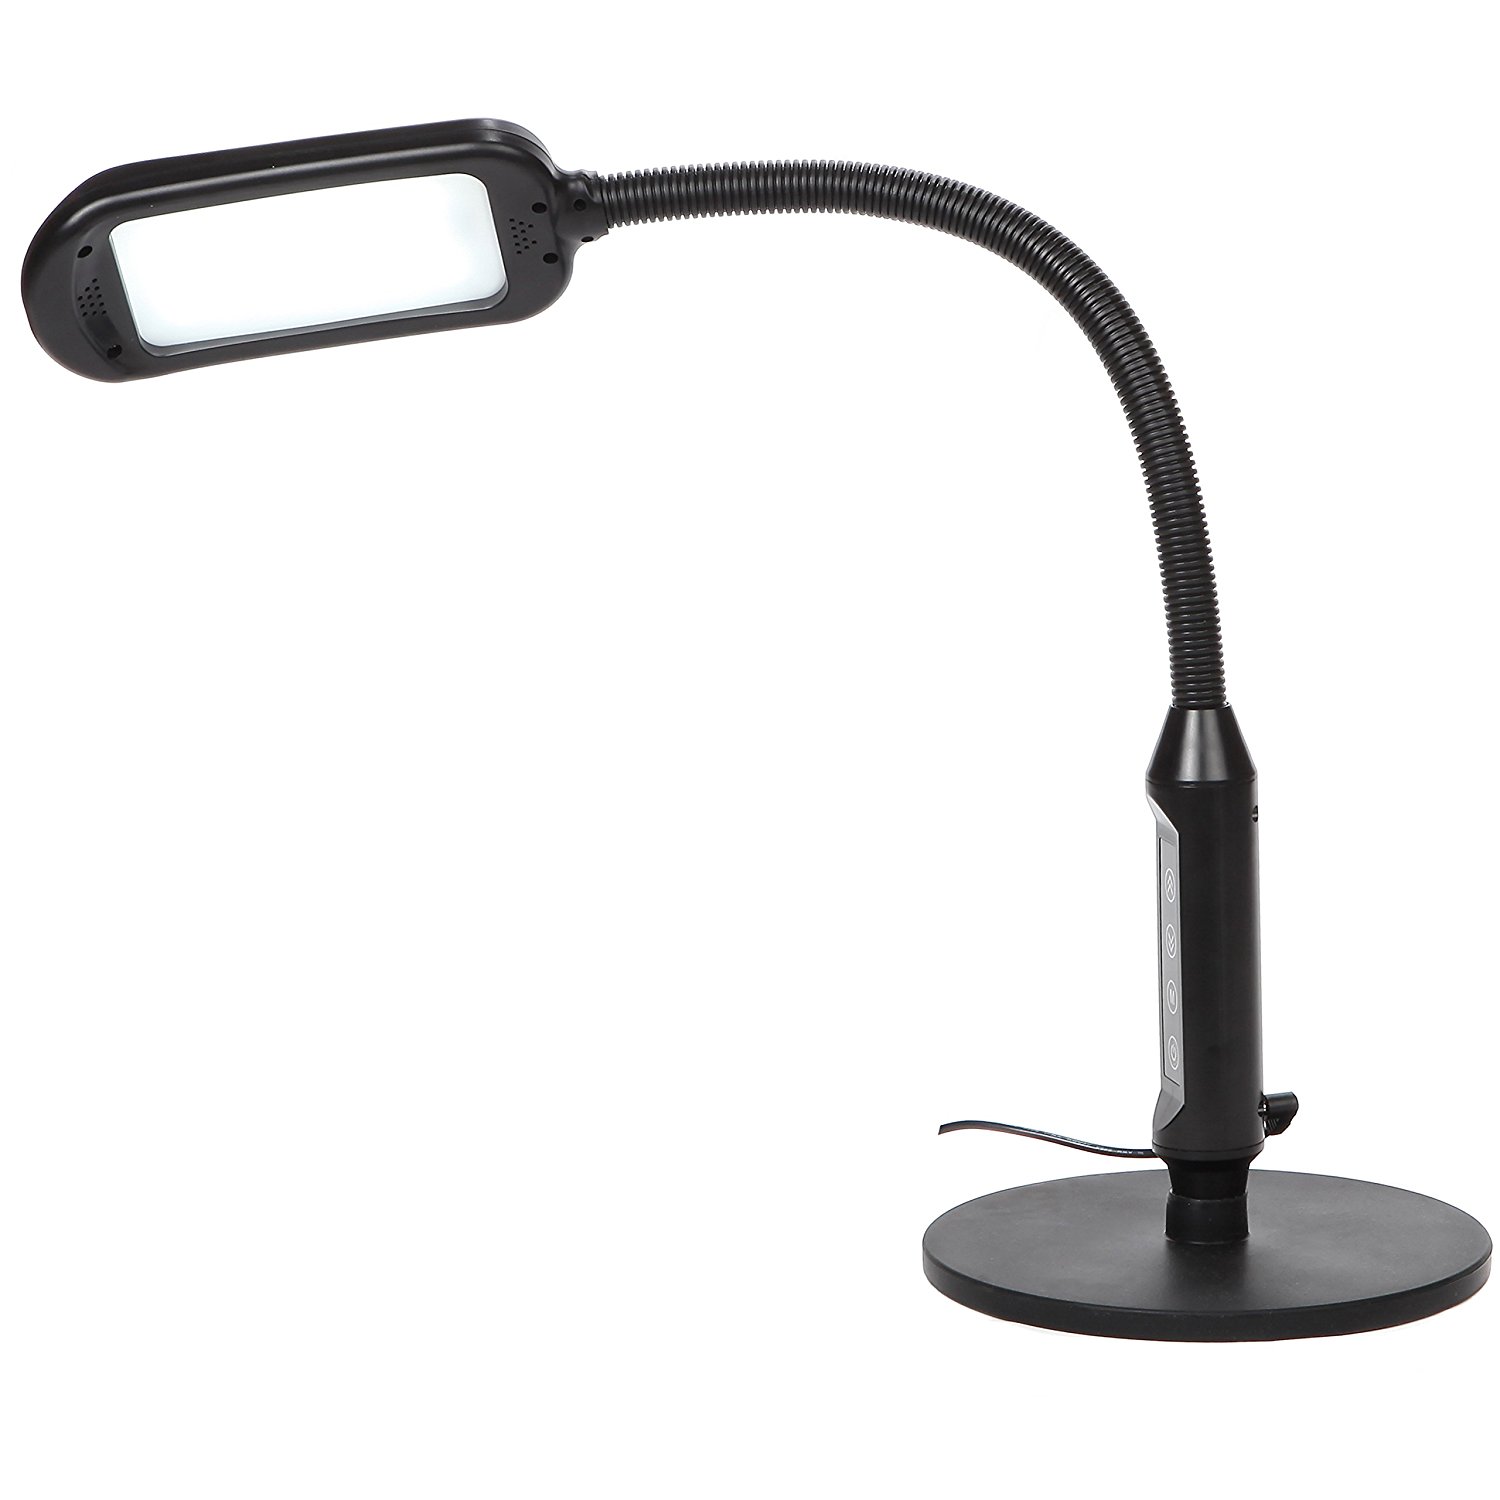 LED Bright 2 in 1 Floor & Desk Lamp Featured Image